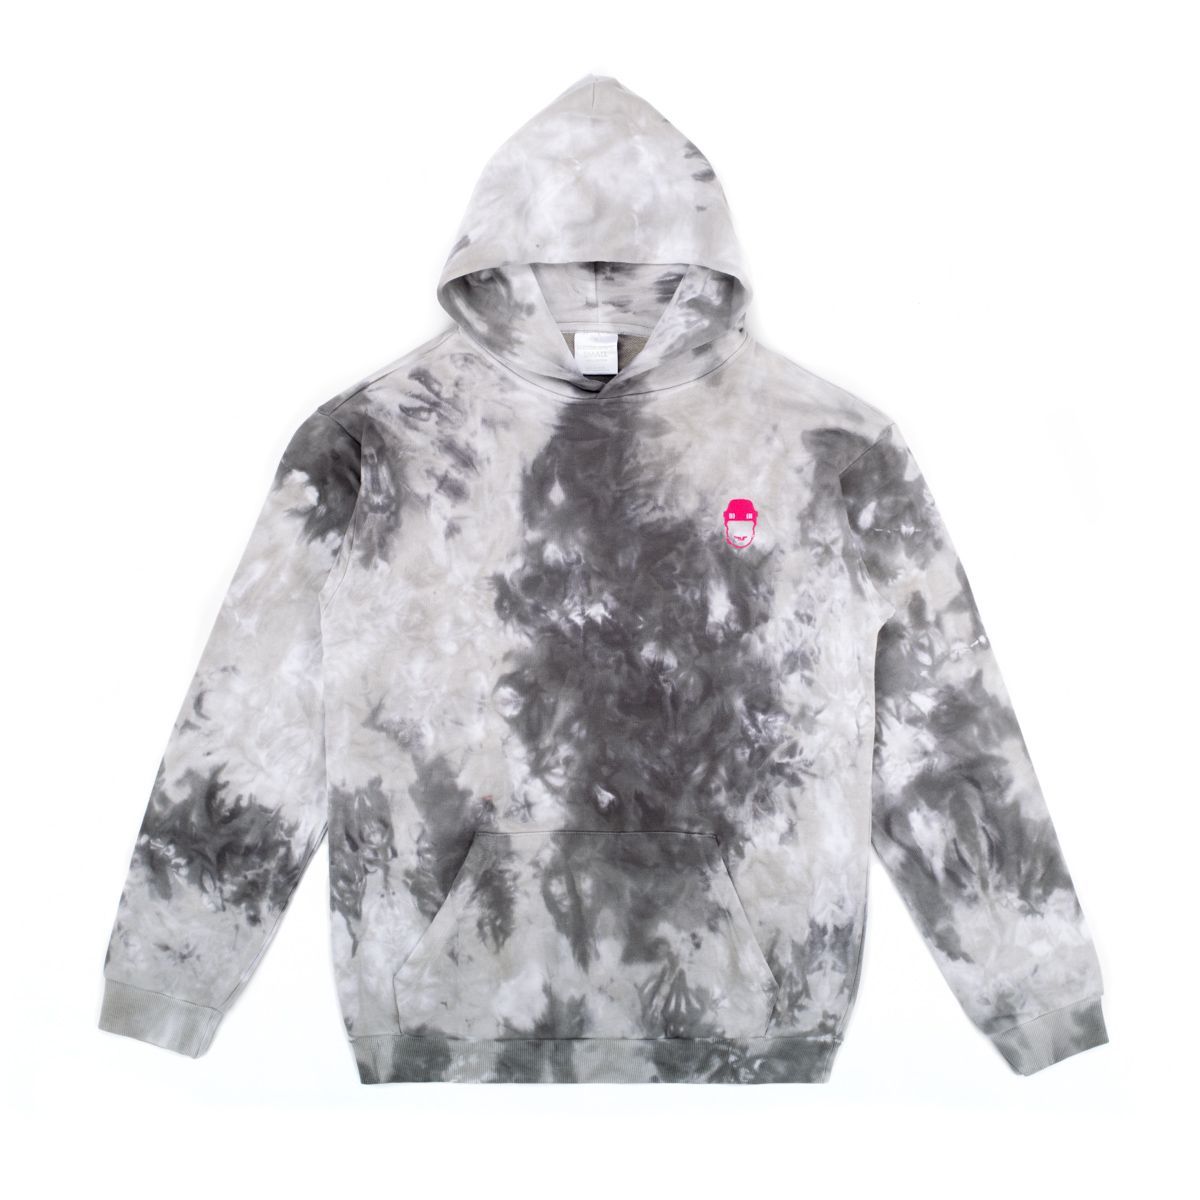 Pink Whitney Premium Embroidered Tie Dye Hoodie - Barstool Sports